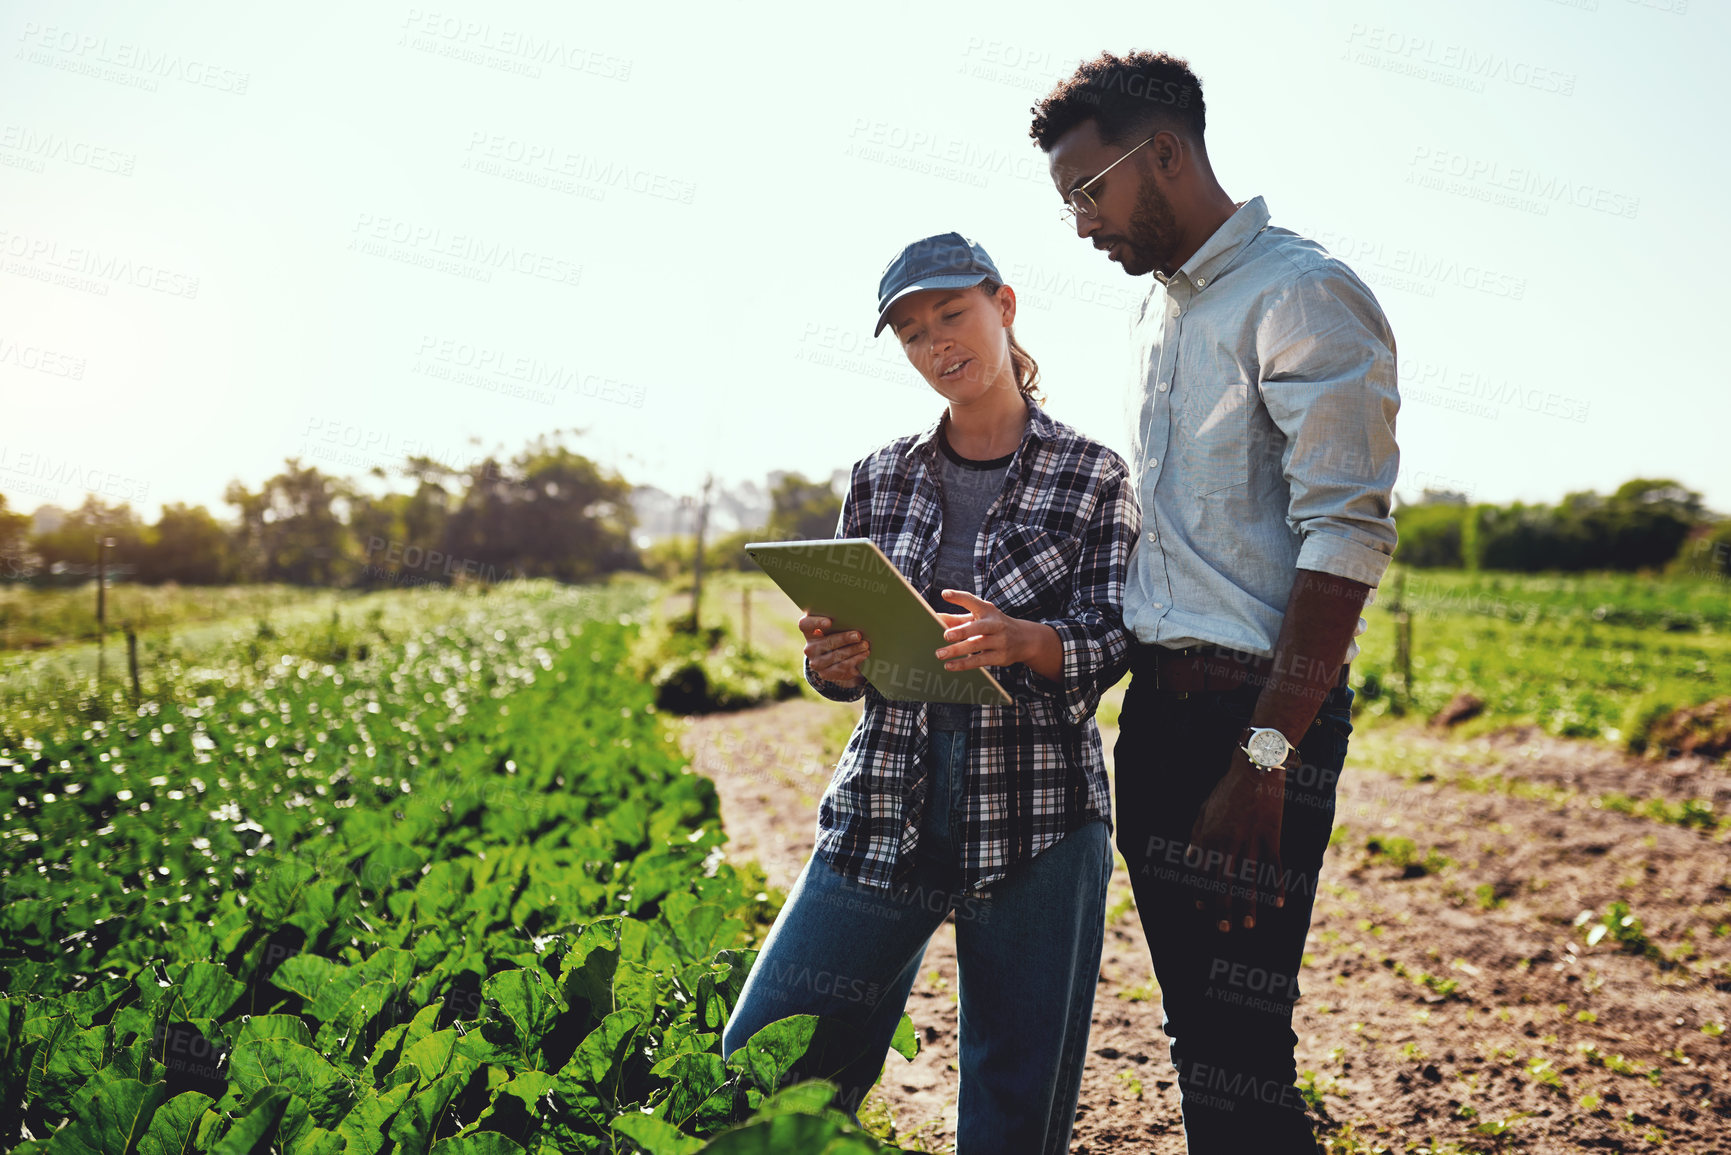 Buy stock photo Cropped shot of two young farmers looking at a tablet while working on their farm